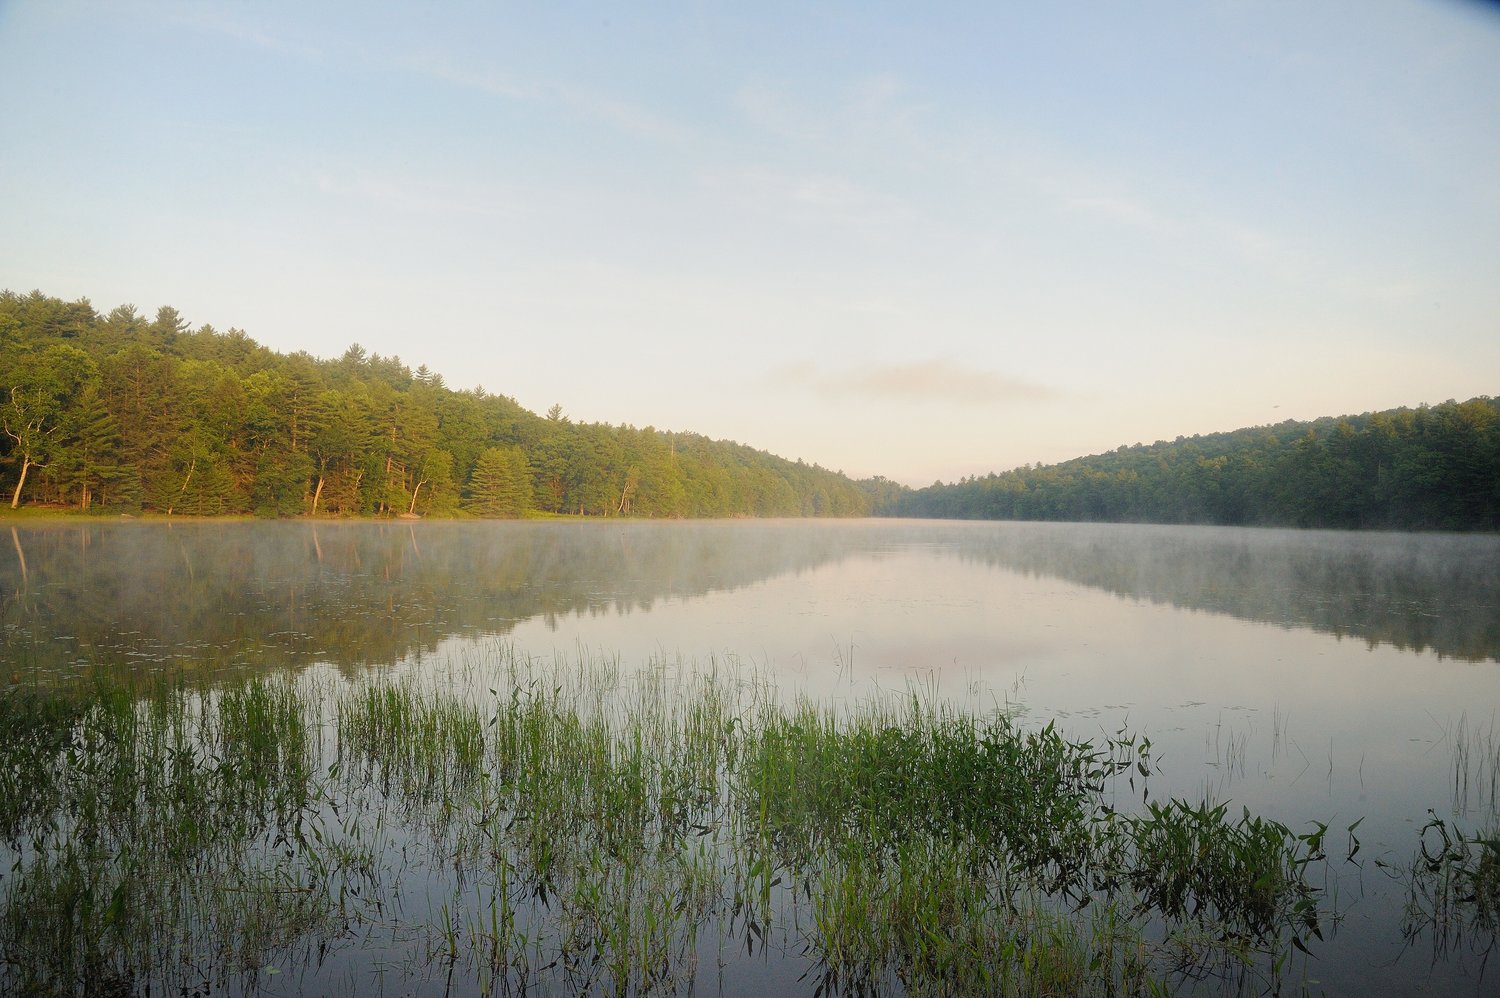 This is Rock Lake, located on the southern area of Ten Mile River Scout Camps. Rock Lake was surveyed during both the 2014 and 2016 Upper Delaware Bioblitz. All of the lakes within the camp are similar in appearance, with only swimming/boating docks and maybe a lodge visible on a typical lake...